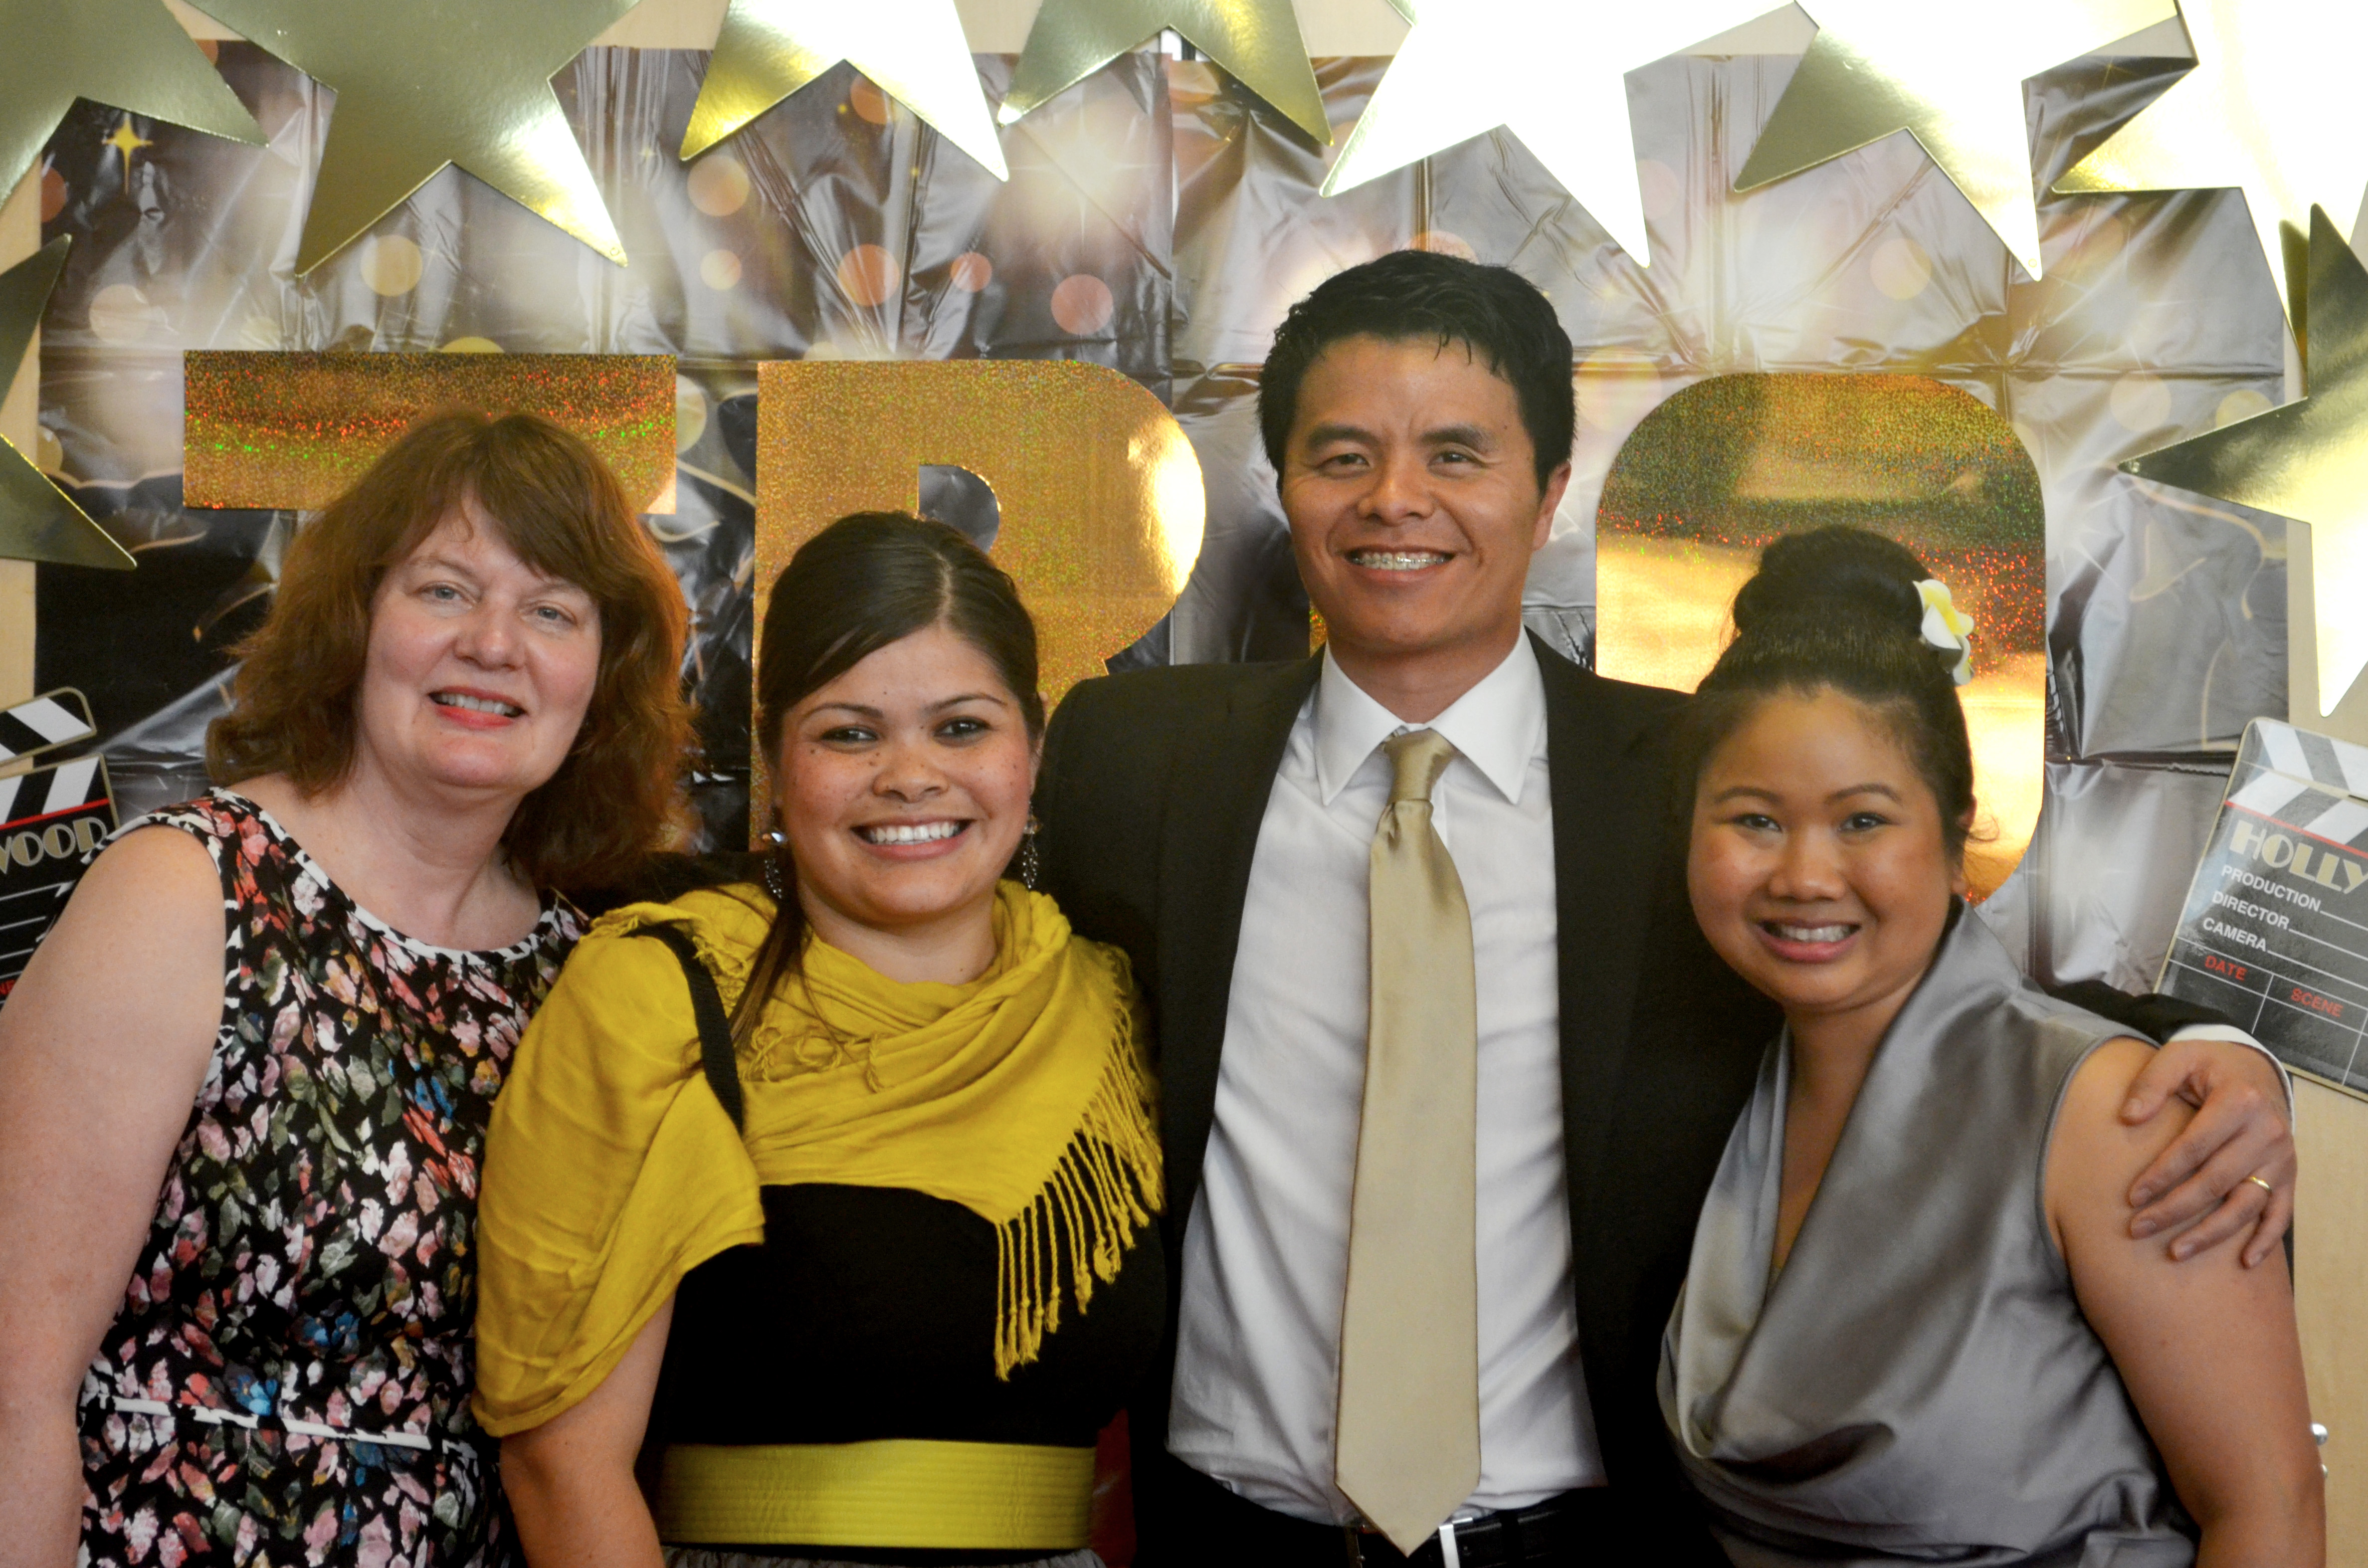 TRiO program staff includes (left to right) Chris Panganiban, Susie Chavez, Ay Saechao and Bopha Cheng